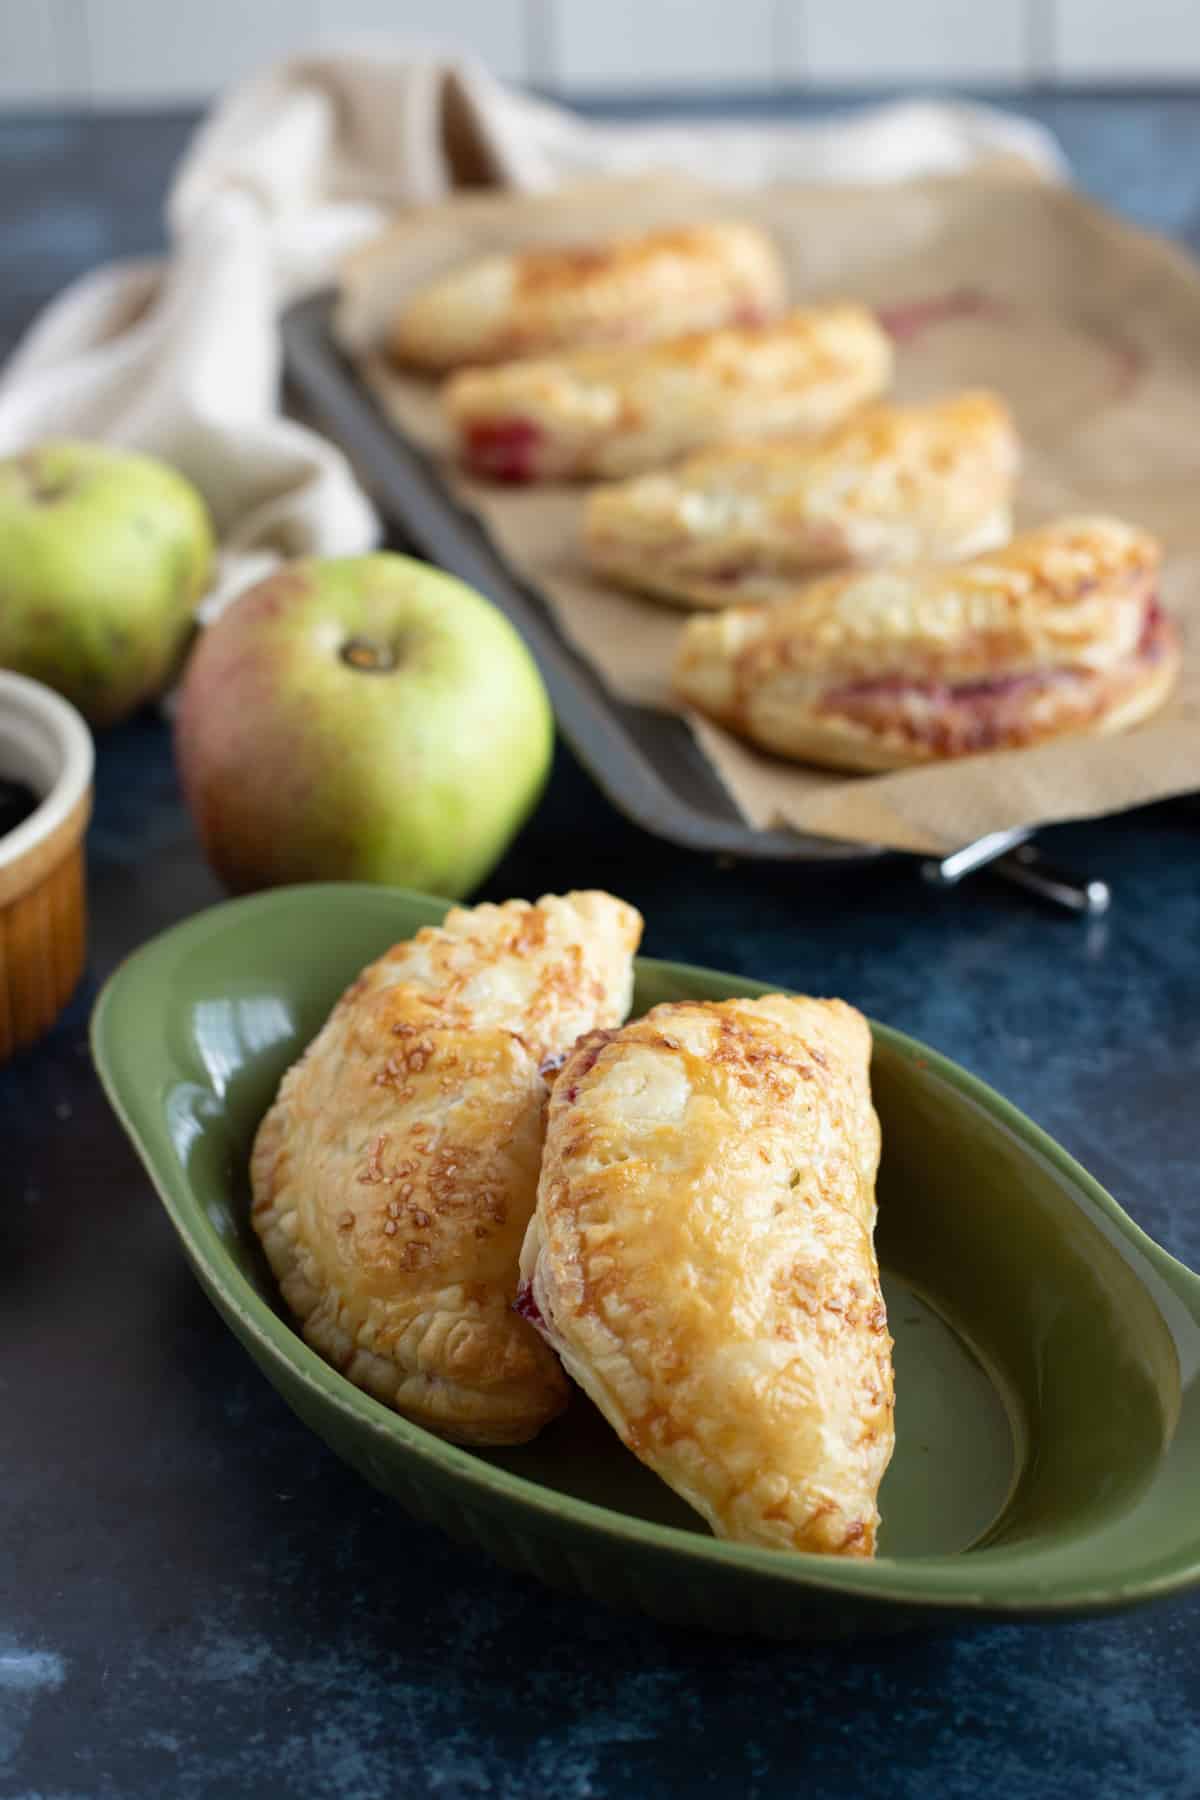 A close up of 2 baked turnovers in a serving dish.